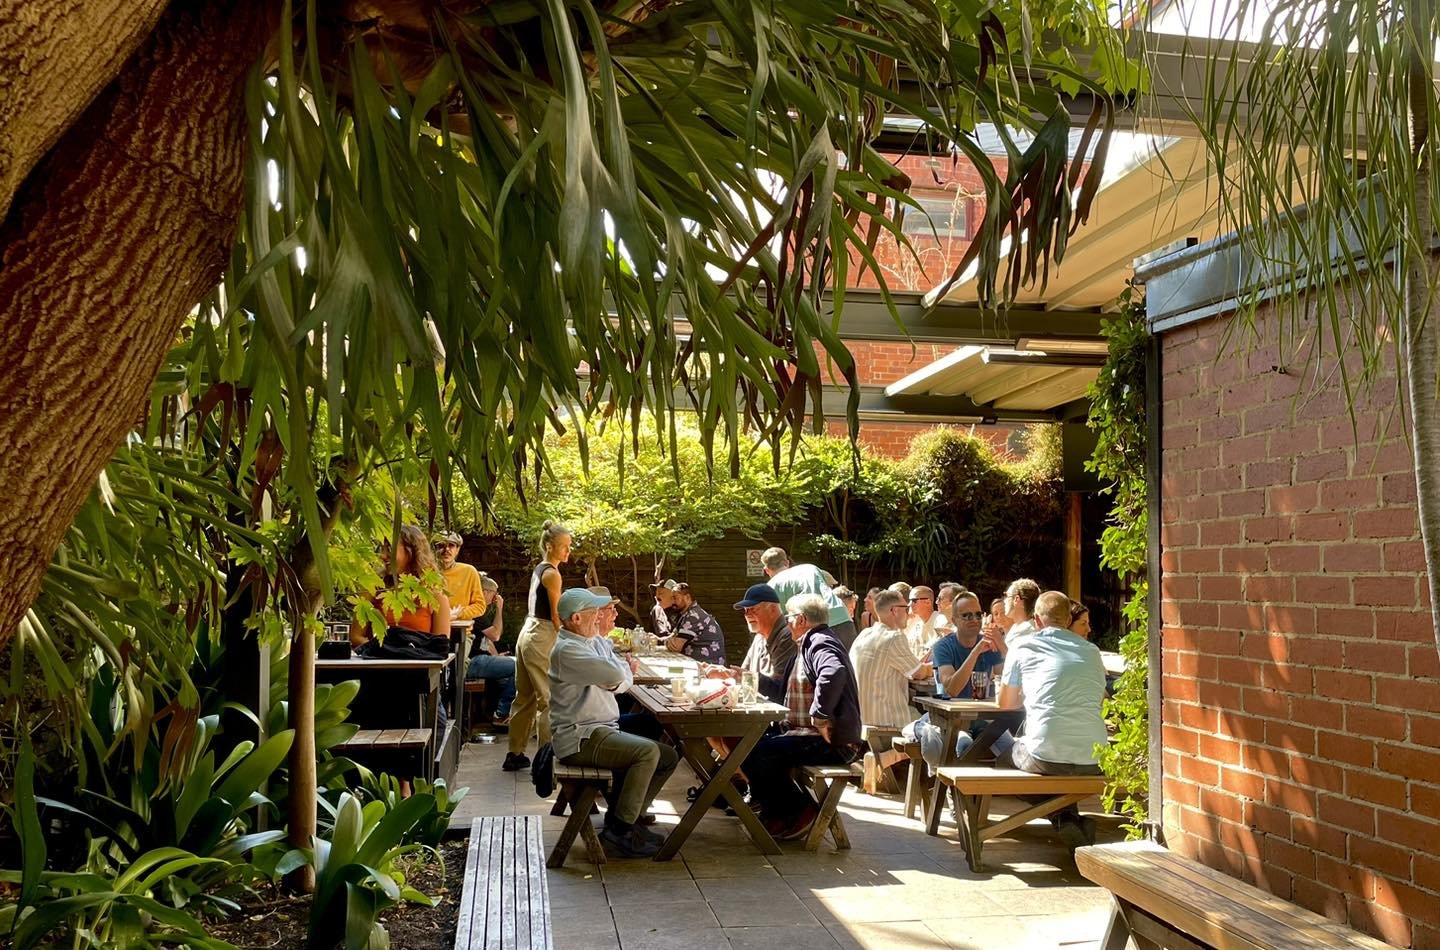 Our beer garden is gorgeous in any weather! We&rsquo;ve got retractable roofs and heaters to keep you comfy all through the colder months.

Give us a call or check out our website for big or small bookings, or just wander in 👐